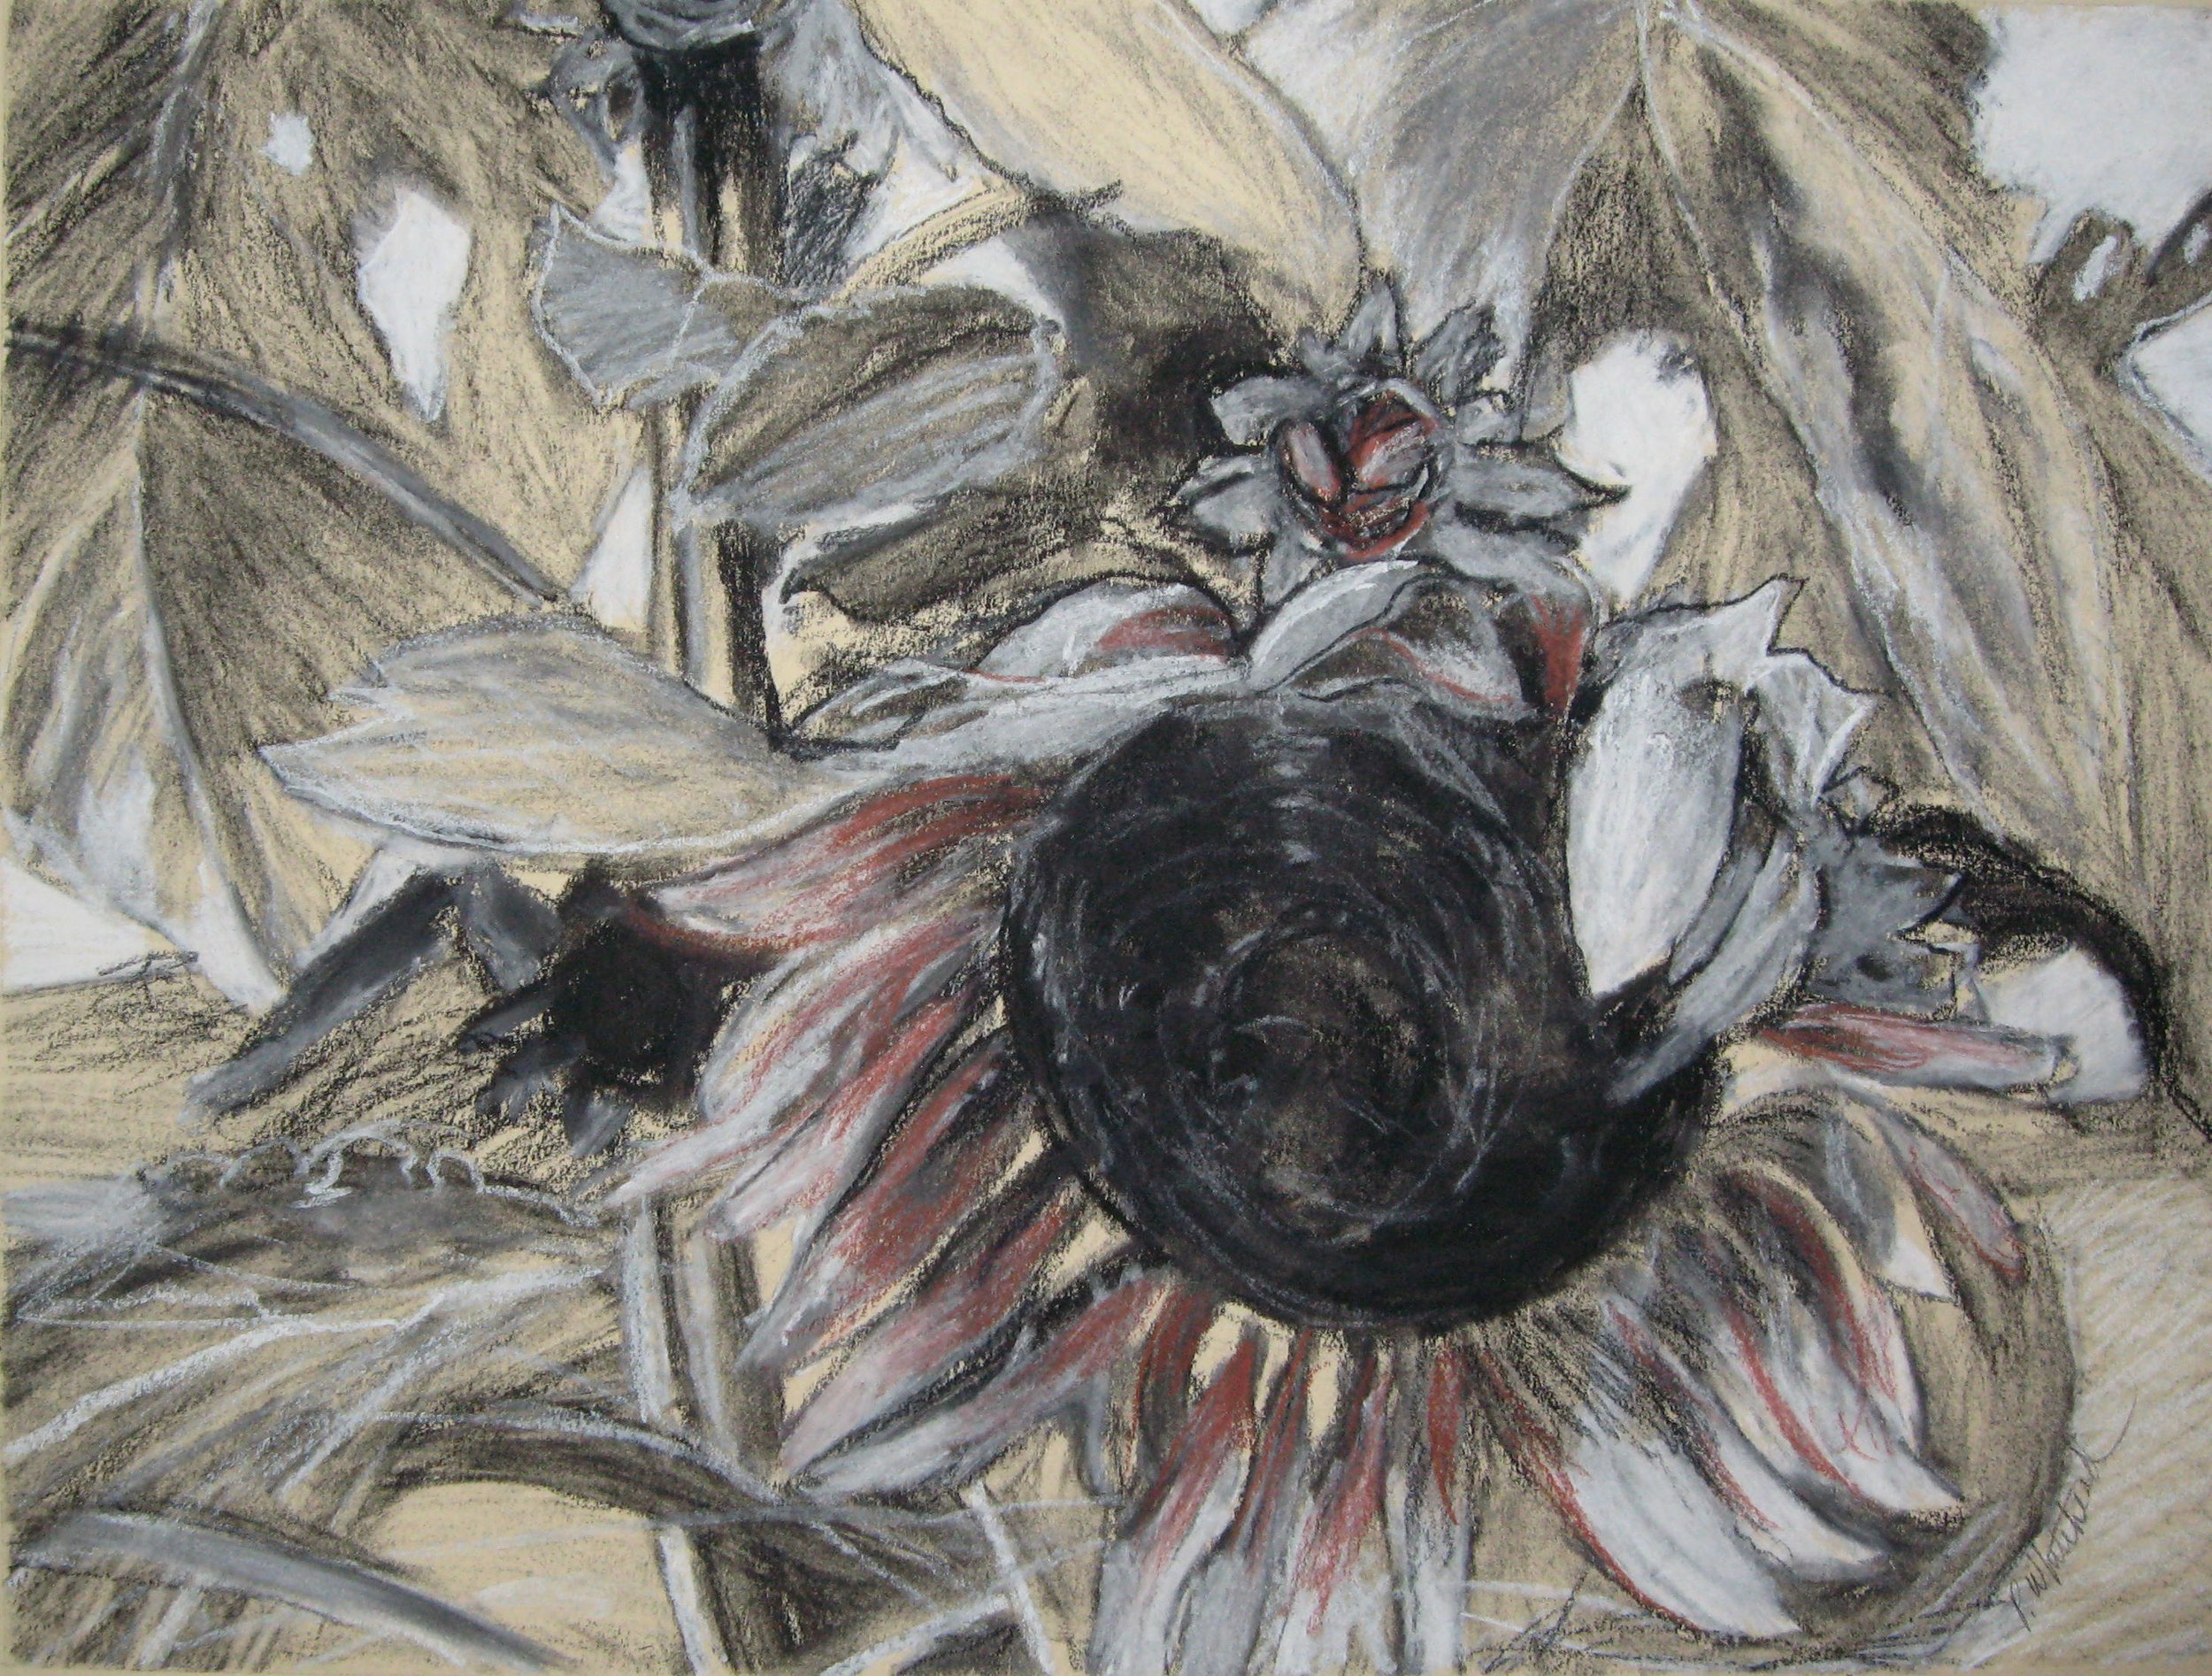 Sunflower Field I, 12 x 9", Conte on paper (private collection)